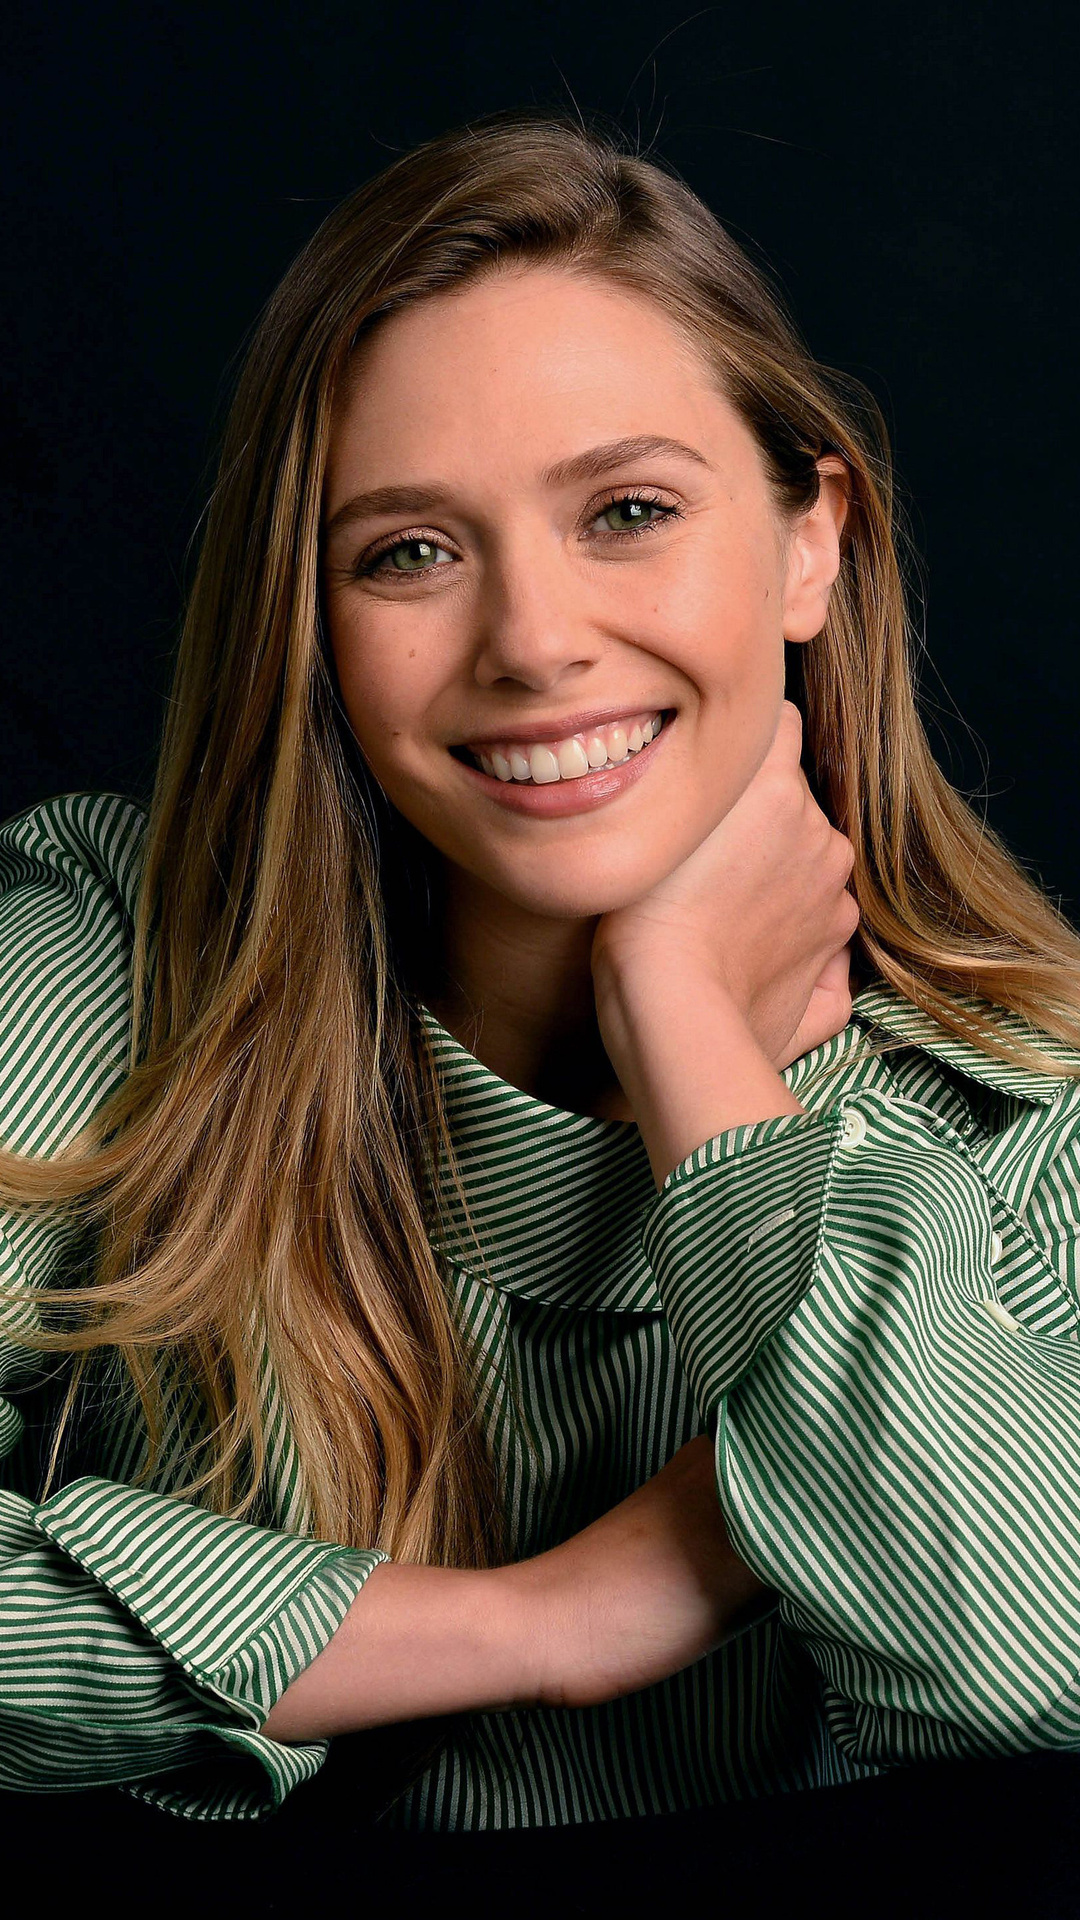 Elizabeth Olsen Ultra HD iPhone 6s, 6 Plus, Pixel xl , One Plus 3t, 5 HD 4k Wallpaper, Image, Background, Photo and Picture